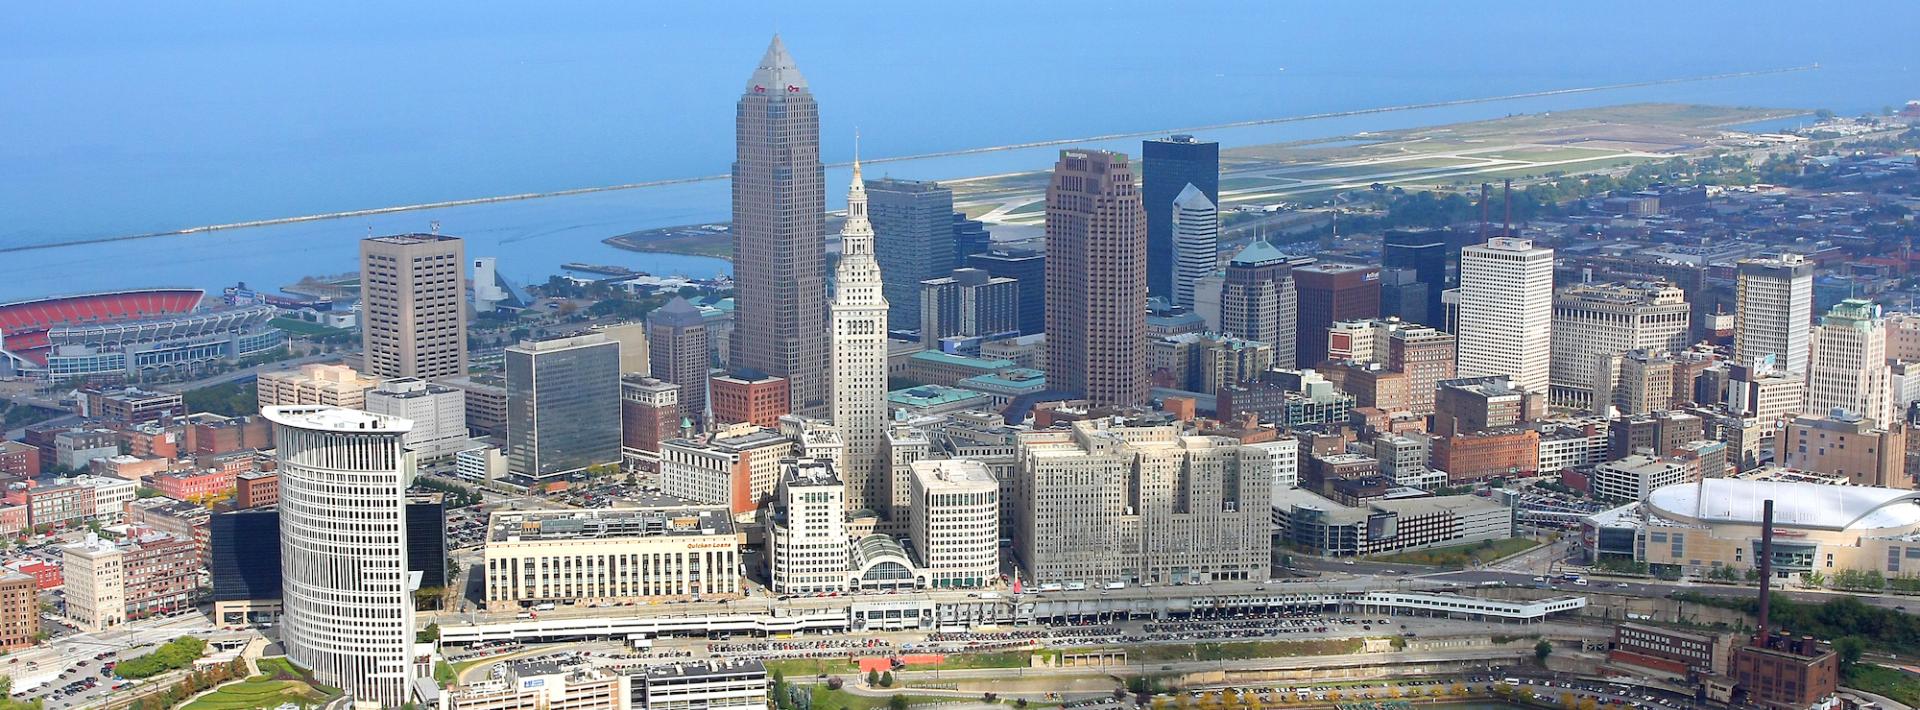 Aerial view of Cleveland